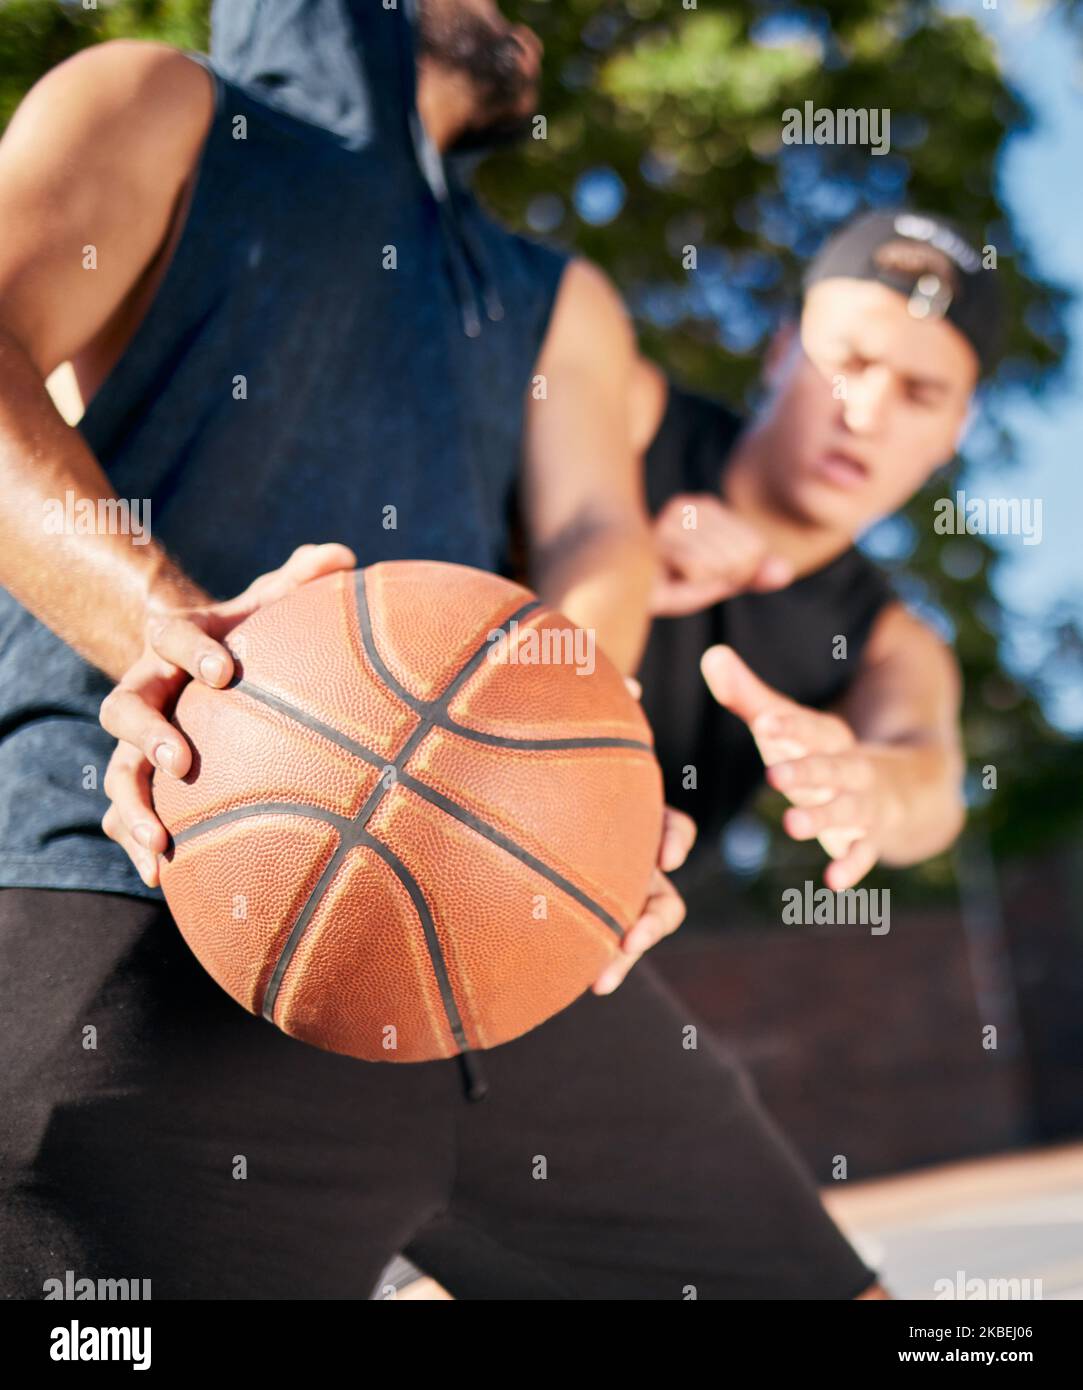 Basketball player, dribble carry ball and playing on basketball court for fitness, heal and training. Basketball friends, outdoor summer sports and Stock Photo